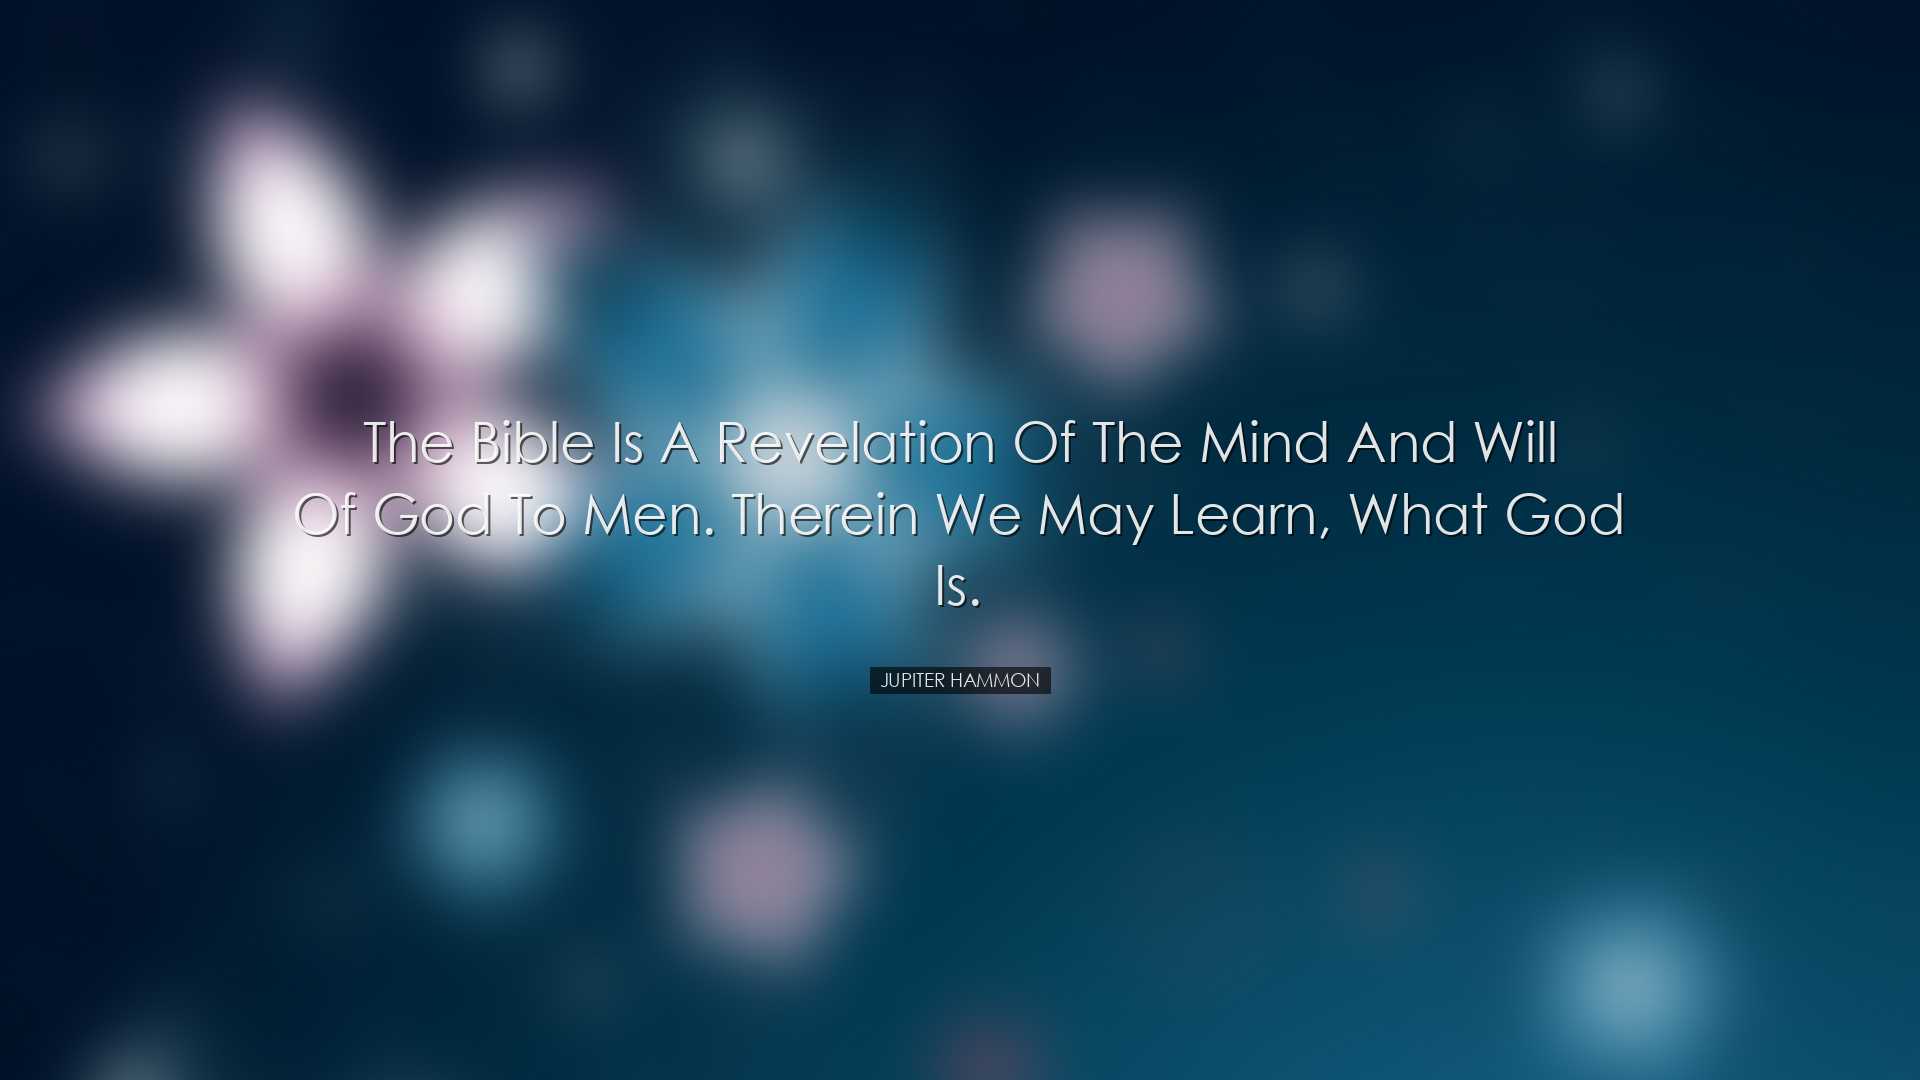 The Bible is a revelation of the mind and will of God to men. Ther